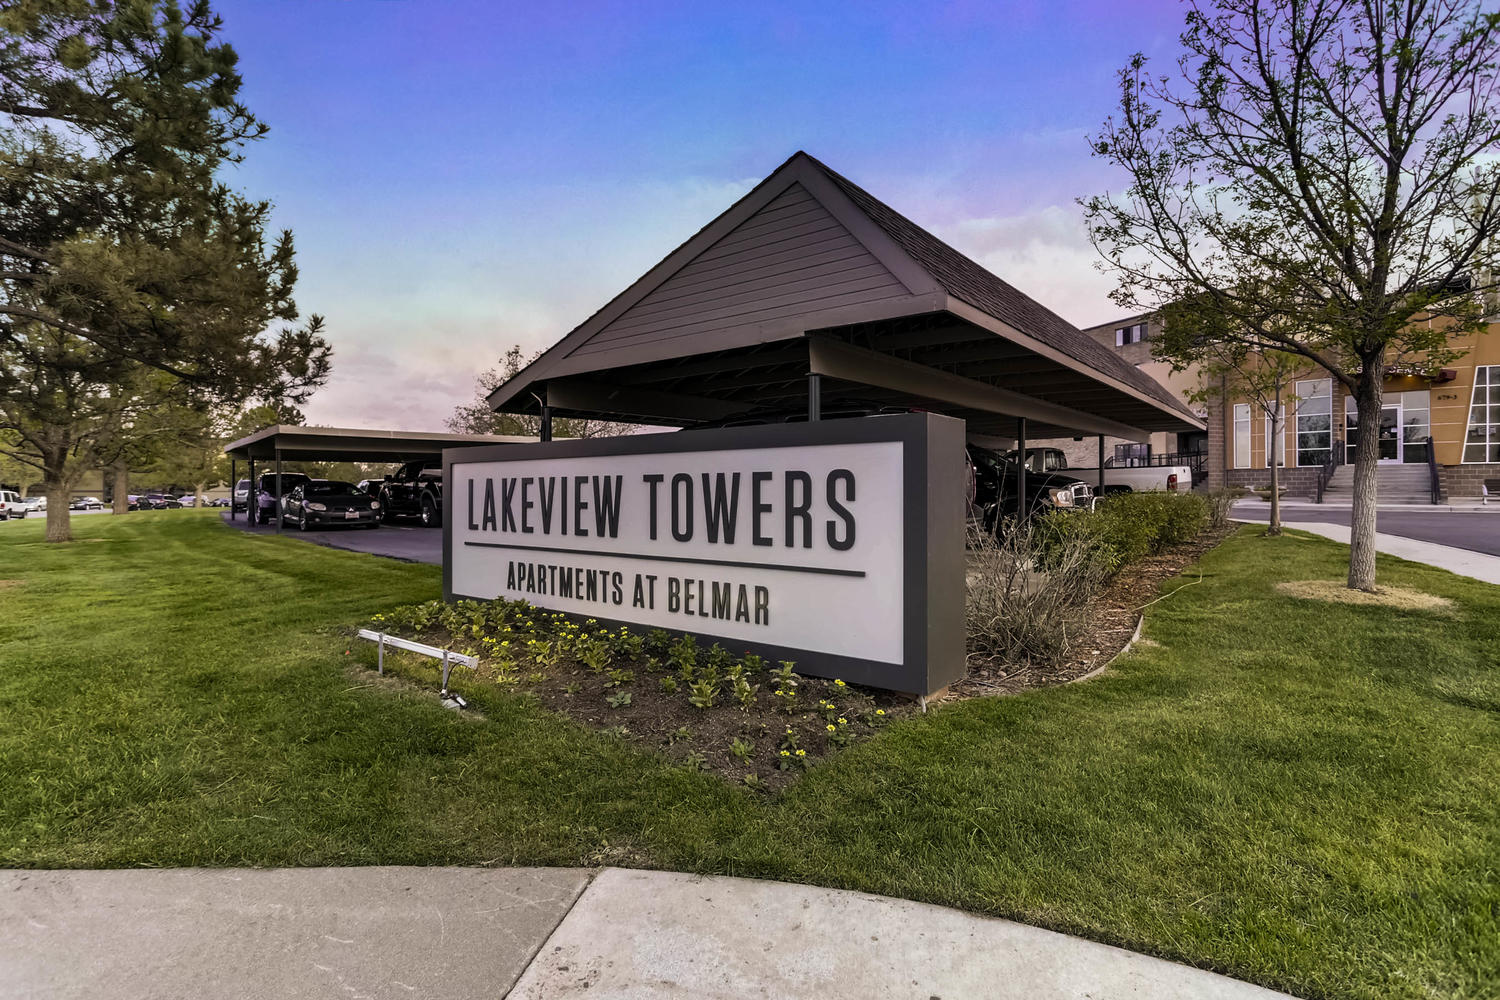 Property sign for Lakeview Towers at the parking lot entrance